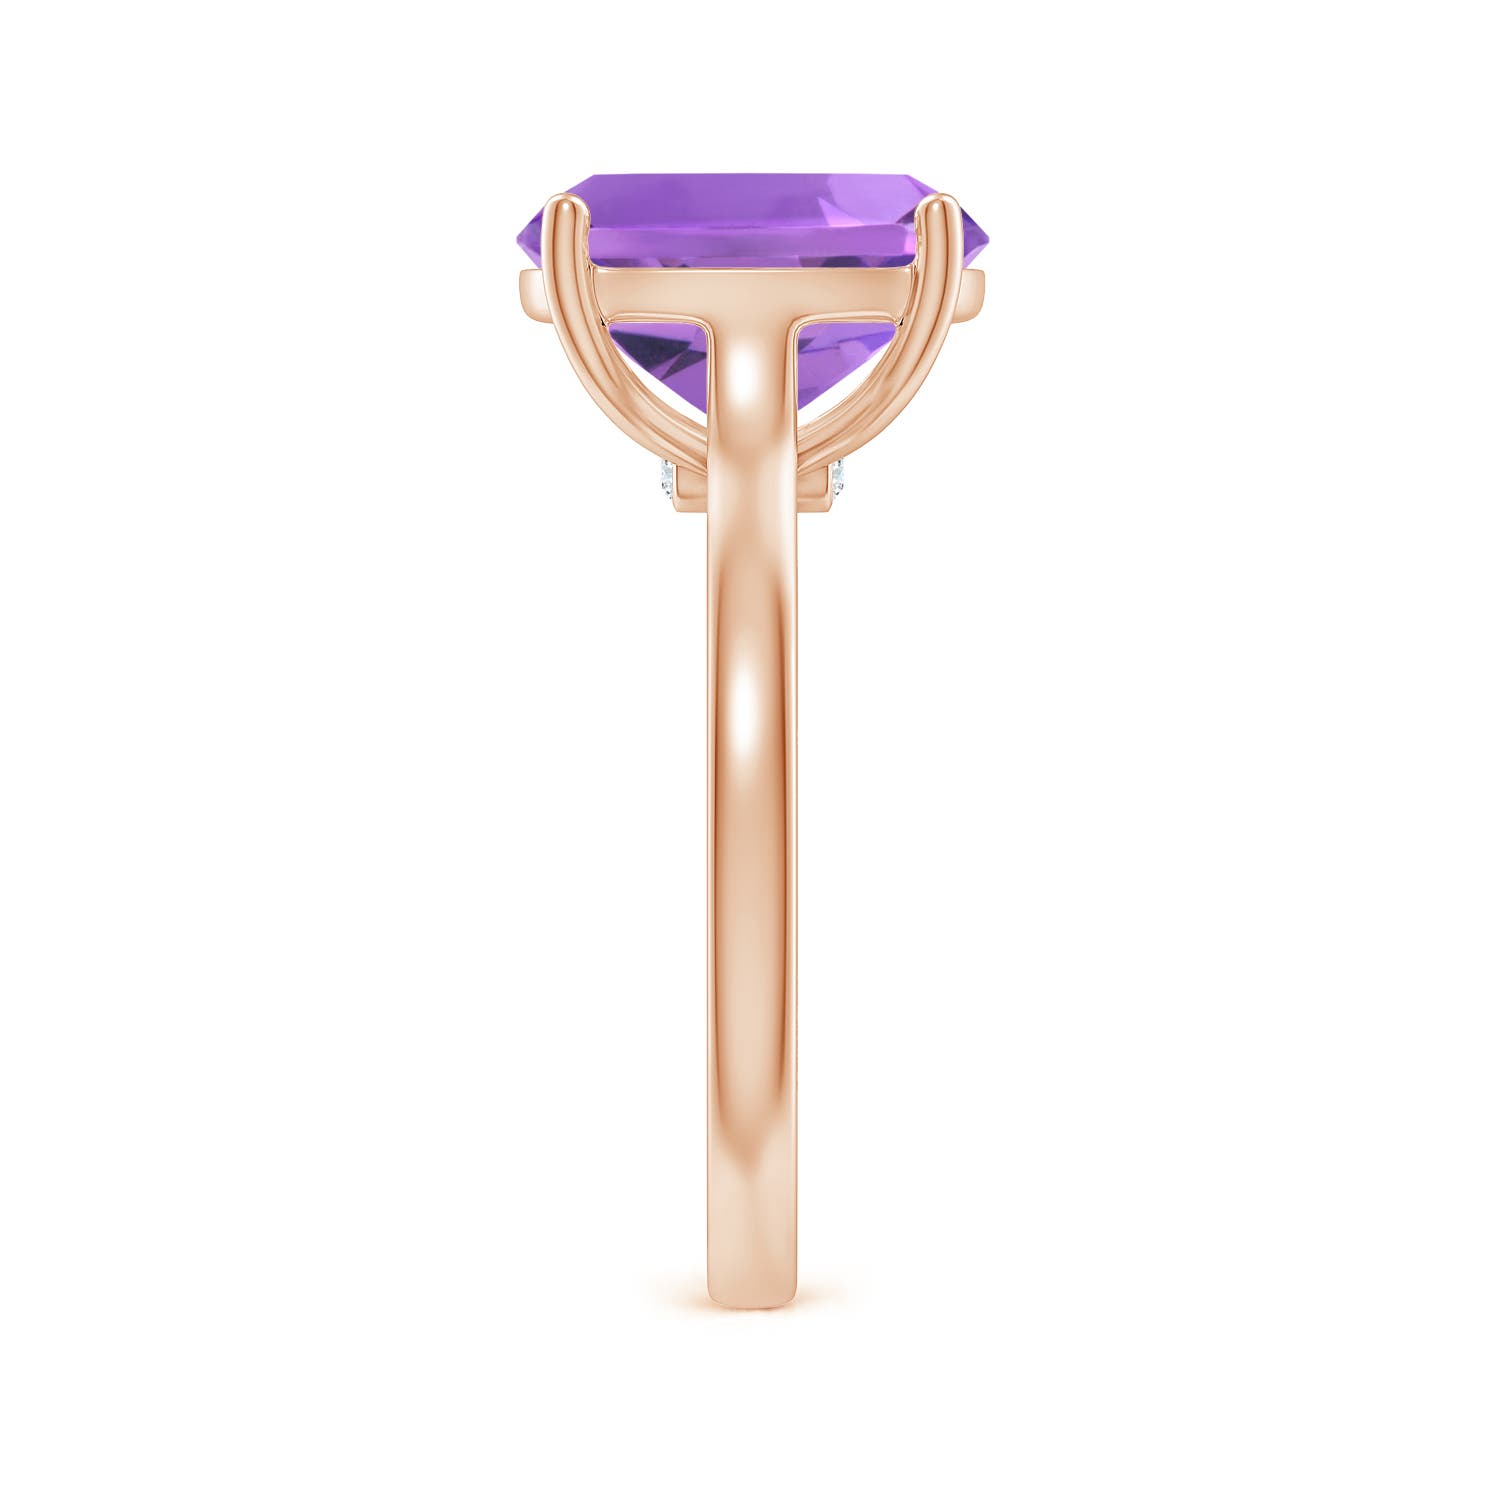 AA - Amethyst / 3.53 CT / 14 KT Rose Gold